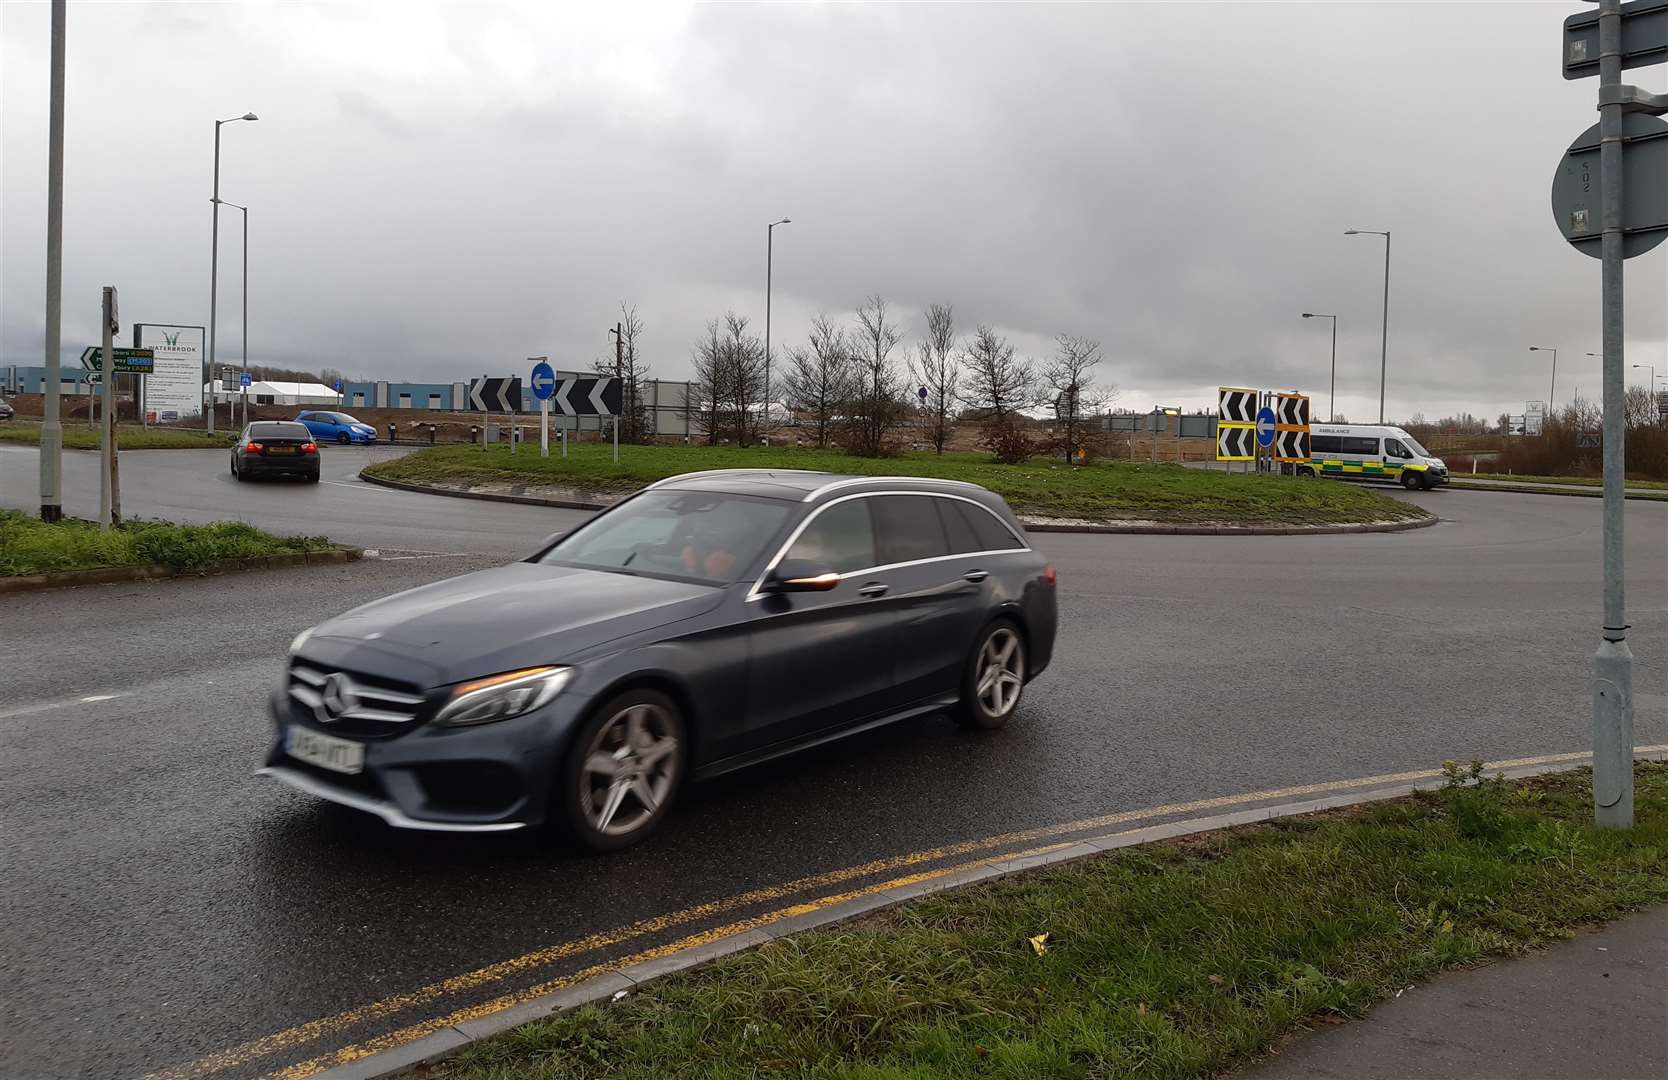 The roundabout is one of the busiest in Ashford, connecting the A2070 with the Orbital Park and Waterbrook Park estates